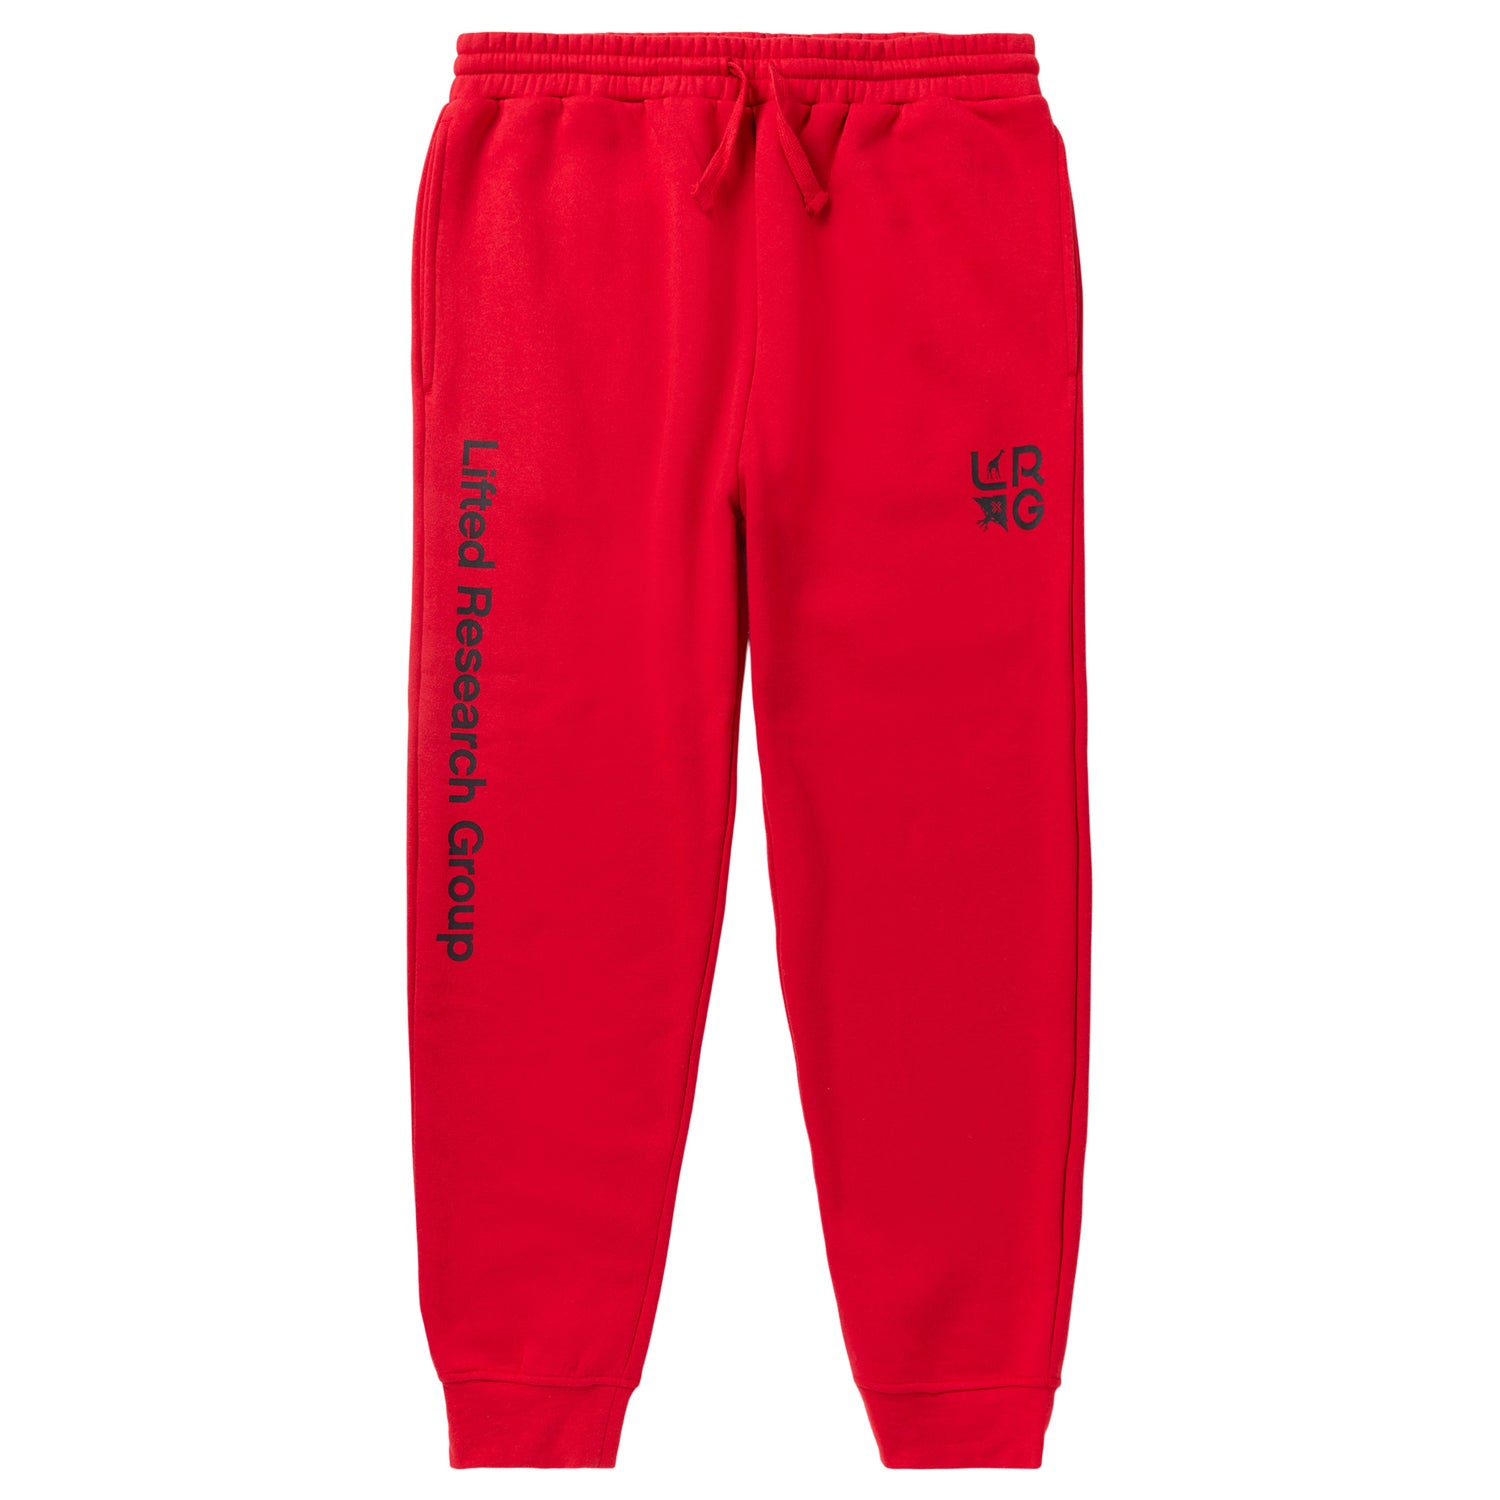 STACKED MULTI LOGO JOGGER SWEATPANTS - RED